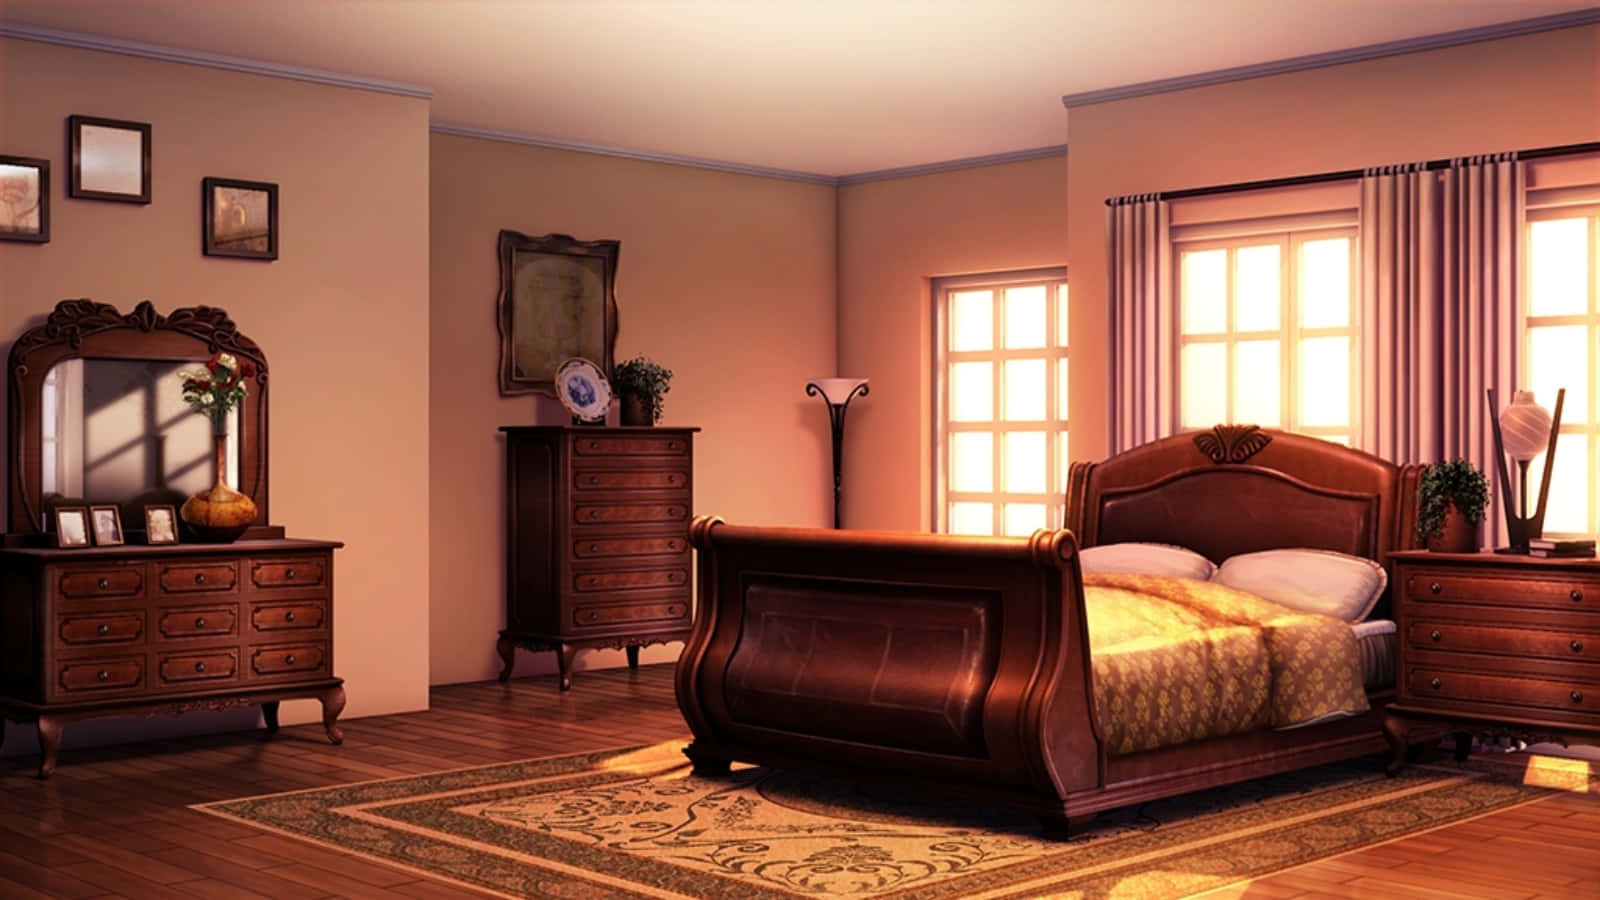 A Bedroom With A Bed, Dresser, And Mirror